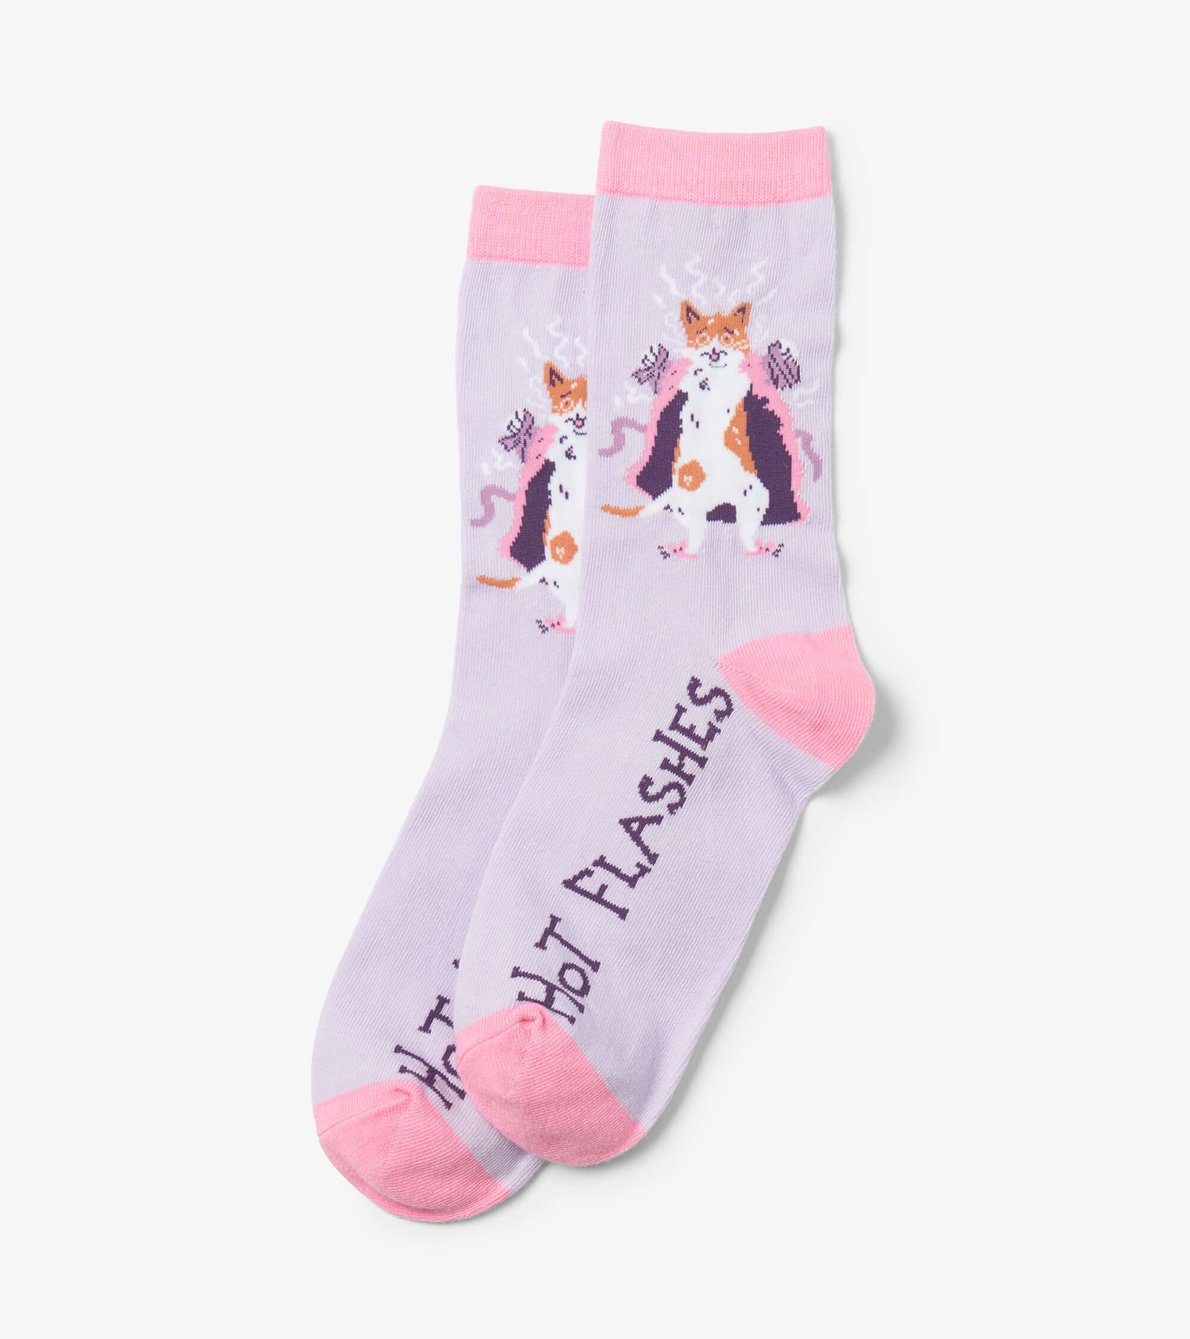 View larger image of Hot Flashes Women's Crew Socks